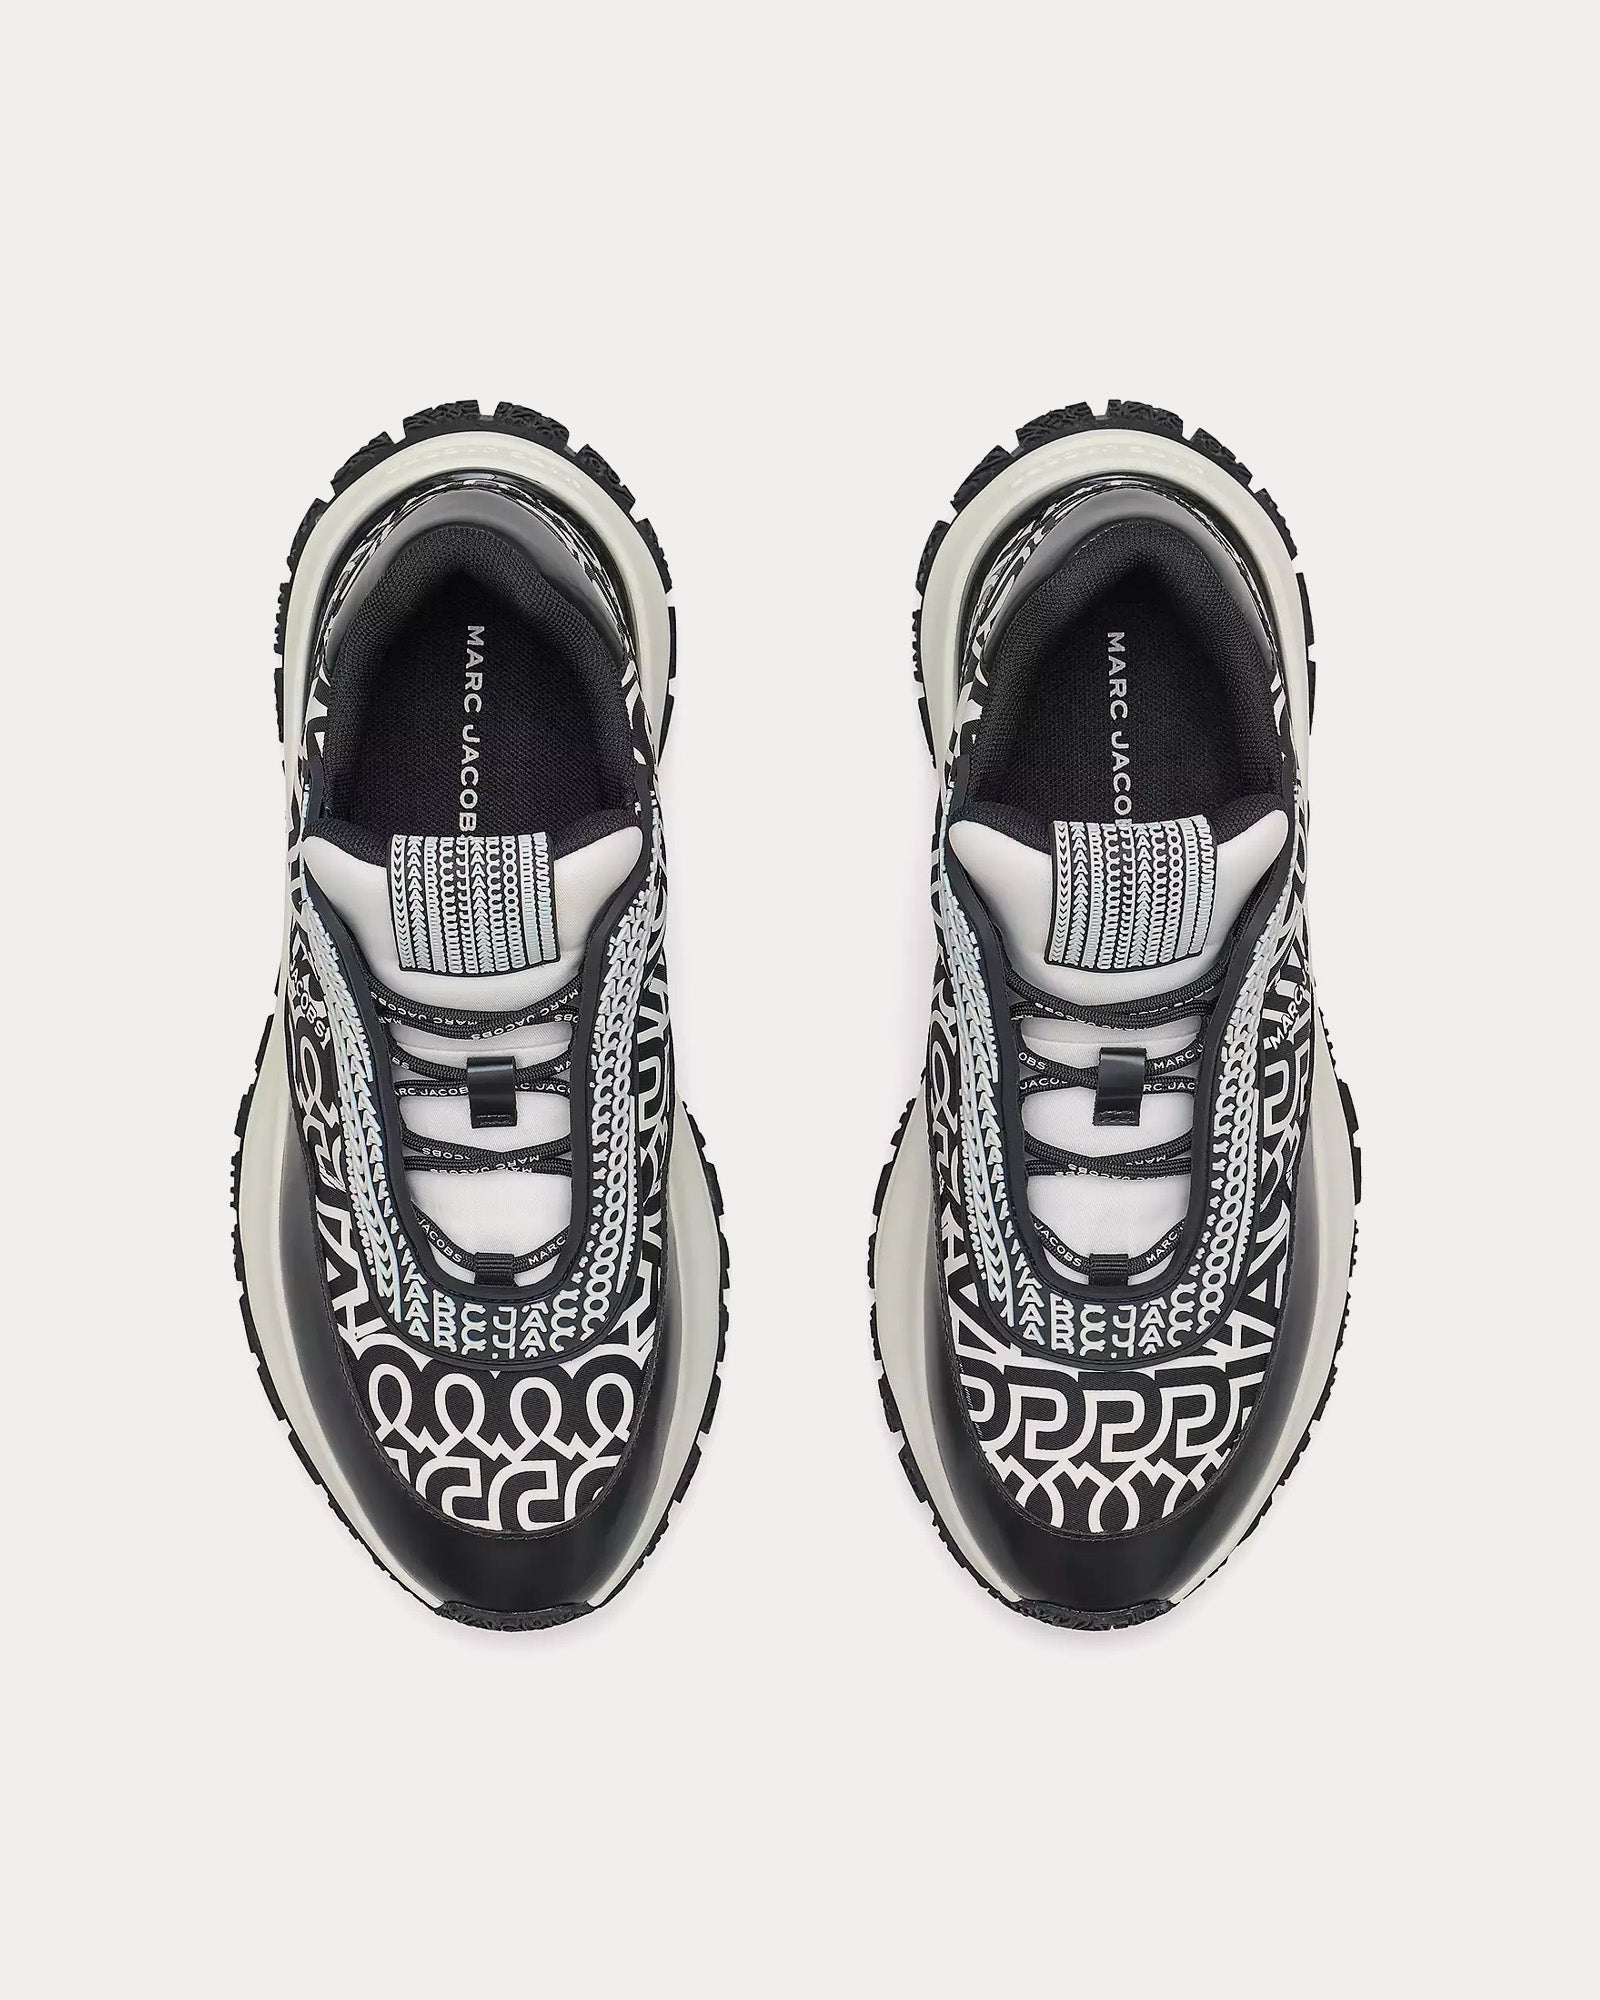 Marc Jacobs - The Monogram Lazy Runner Black / White Low Top Sneakers